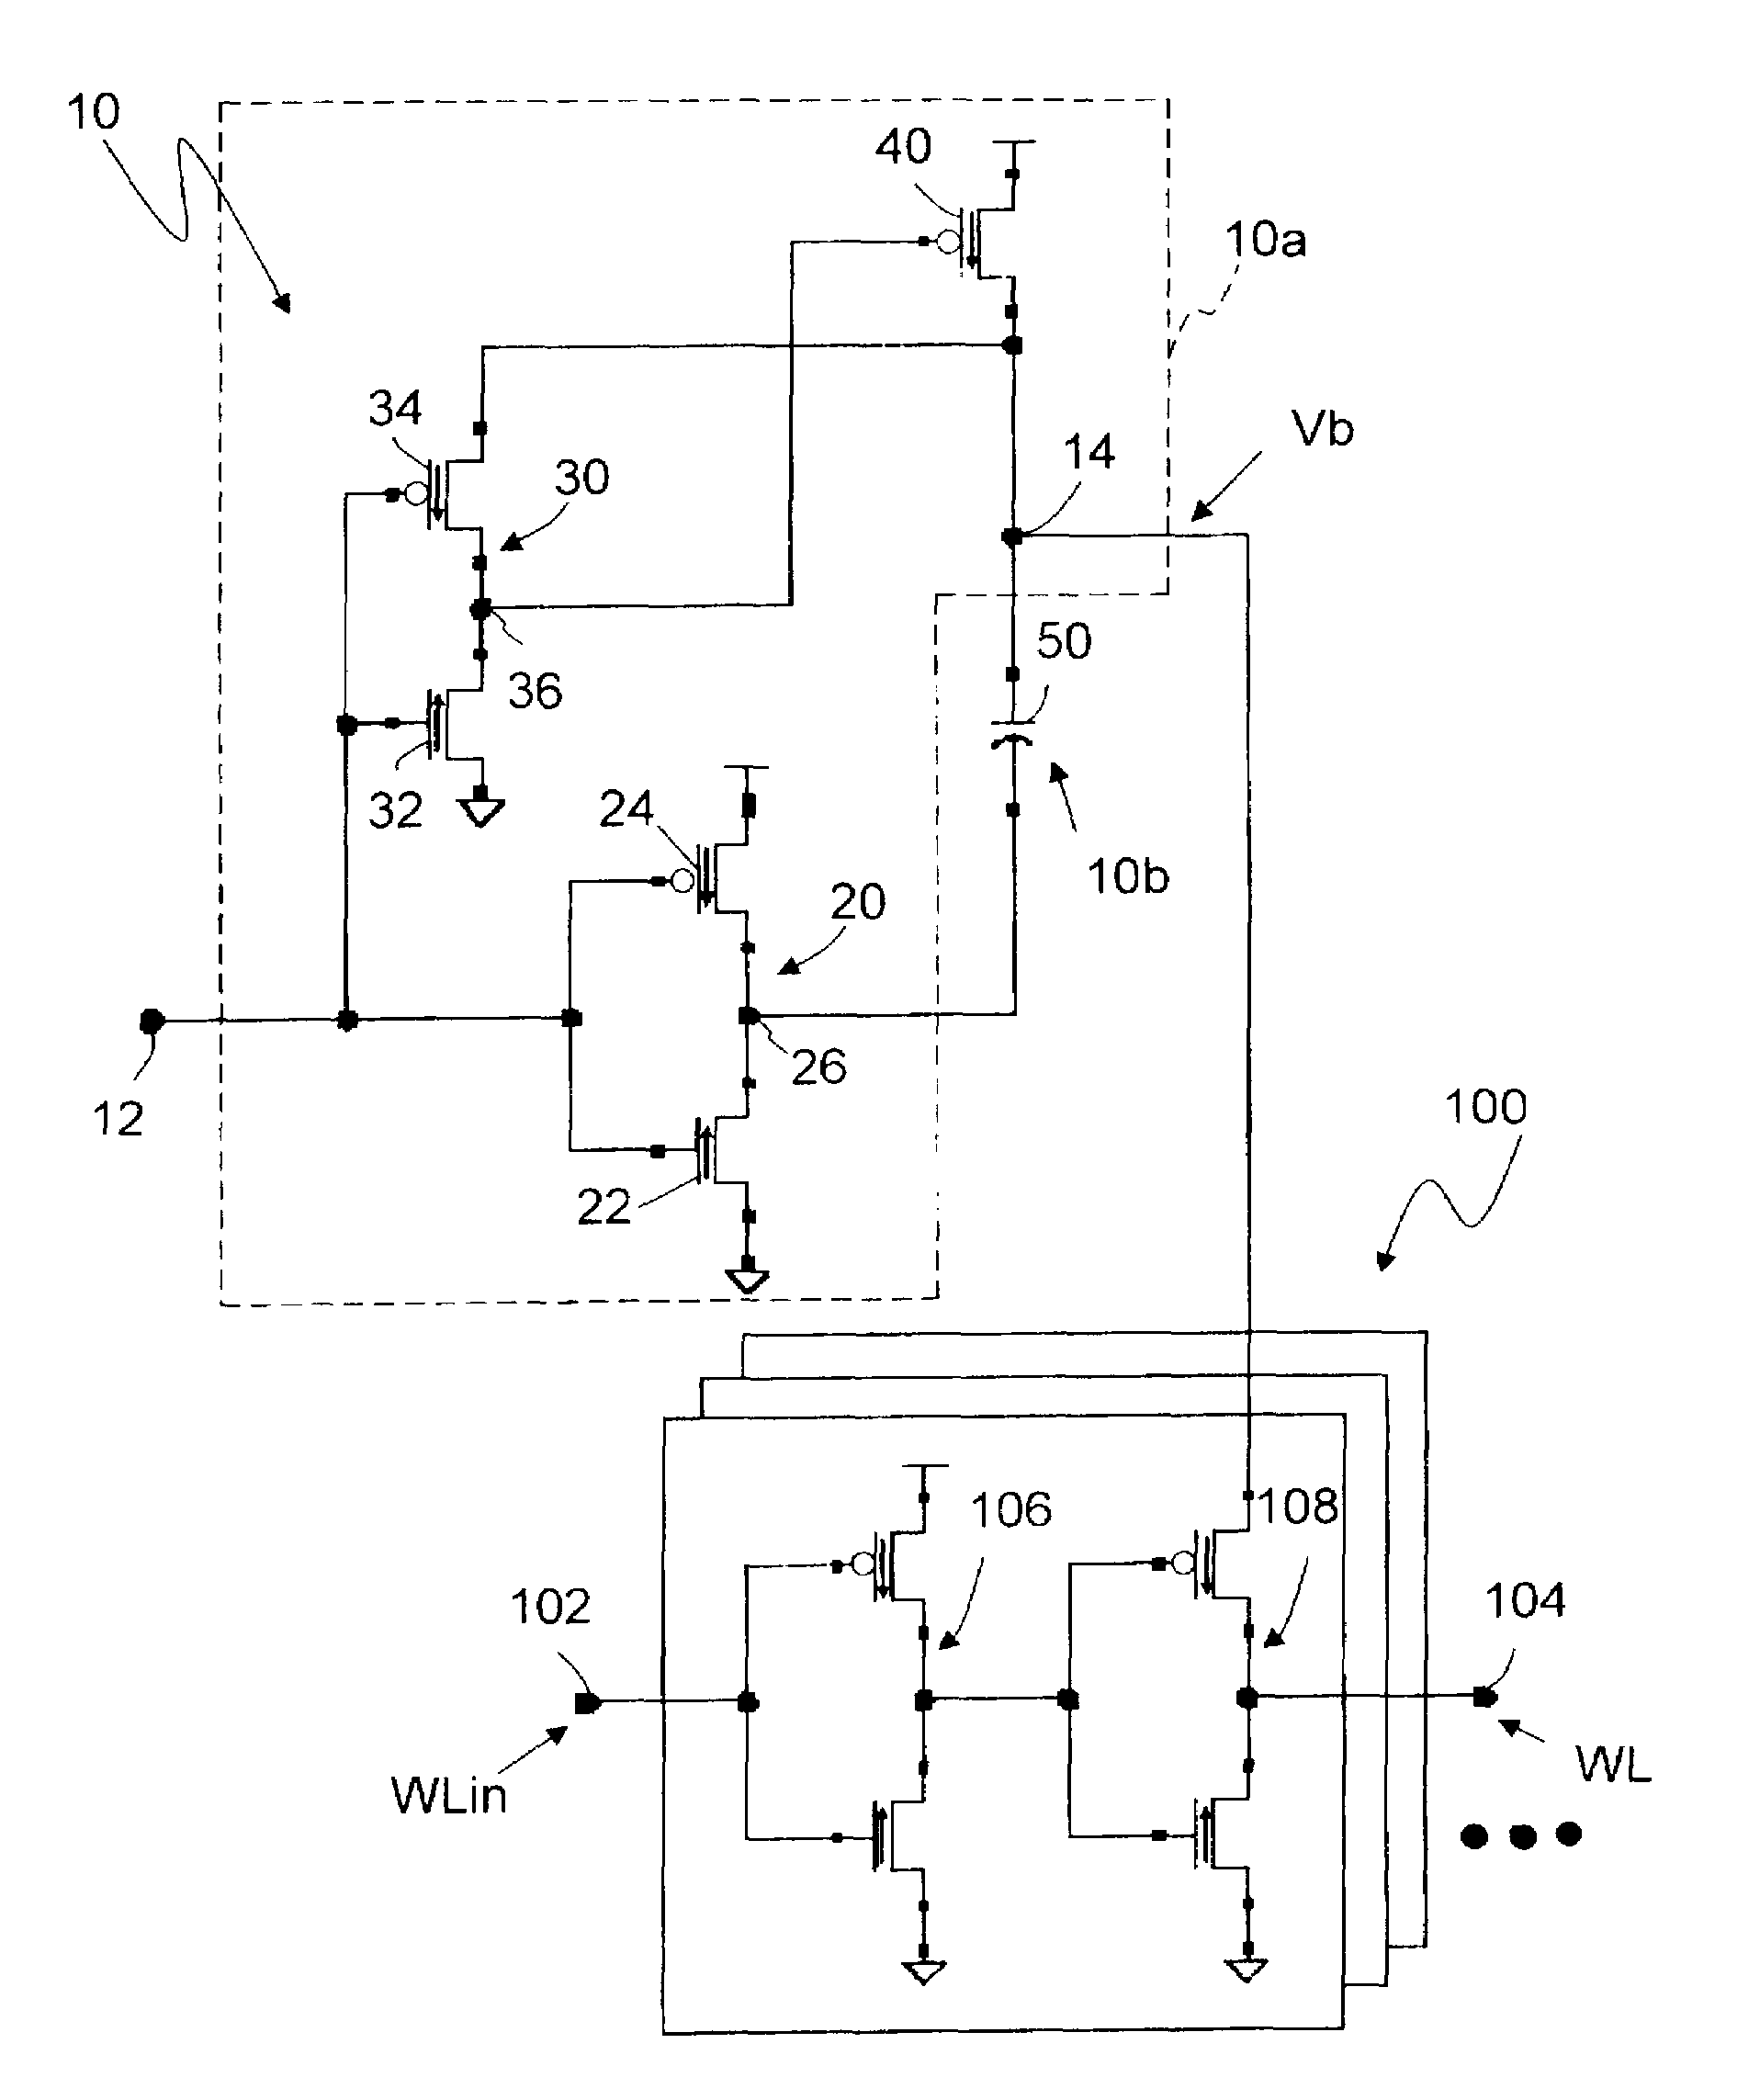 Wordline Booster Design Structure and Method of Operating a Wordline Booster Circuit